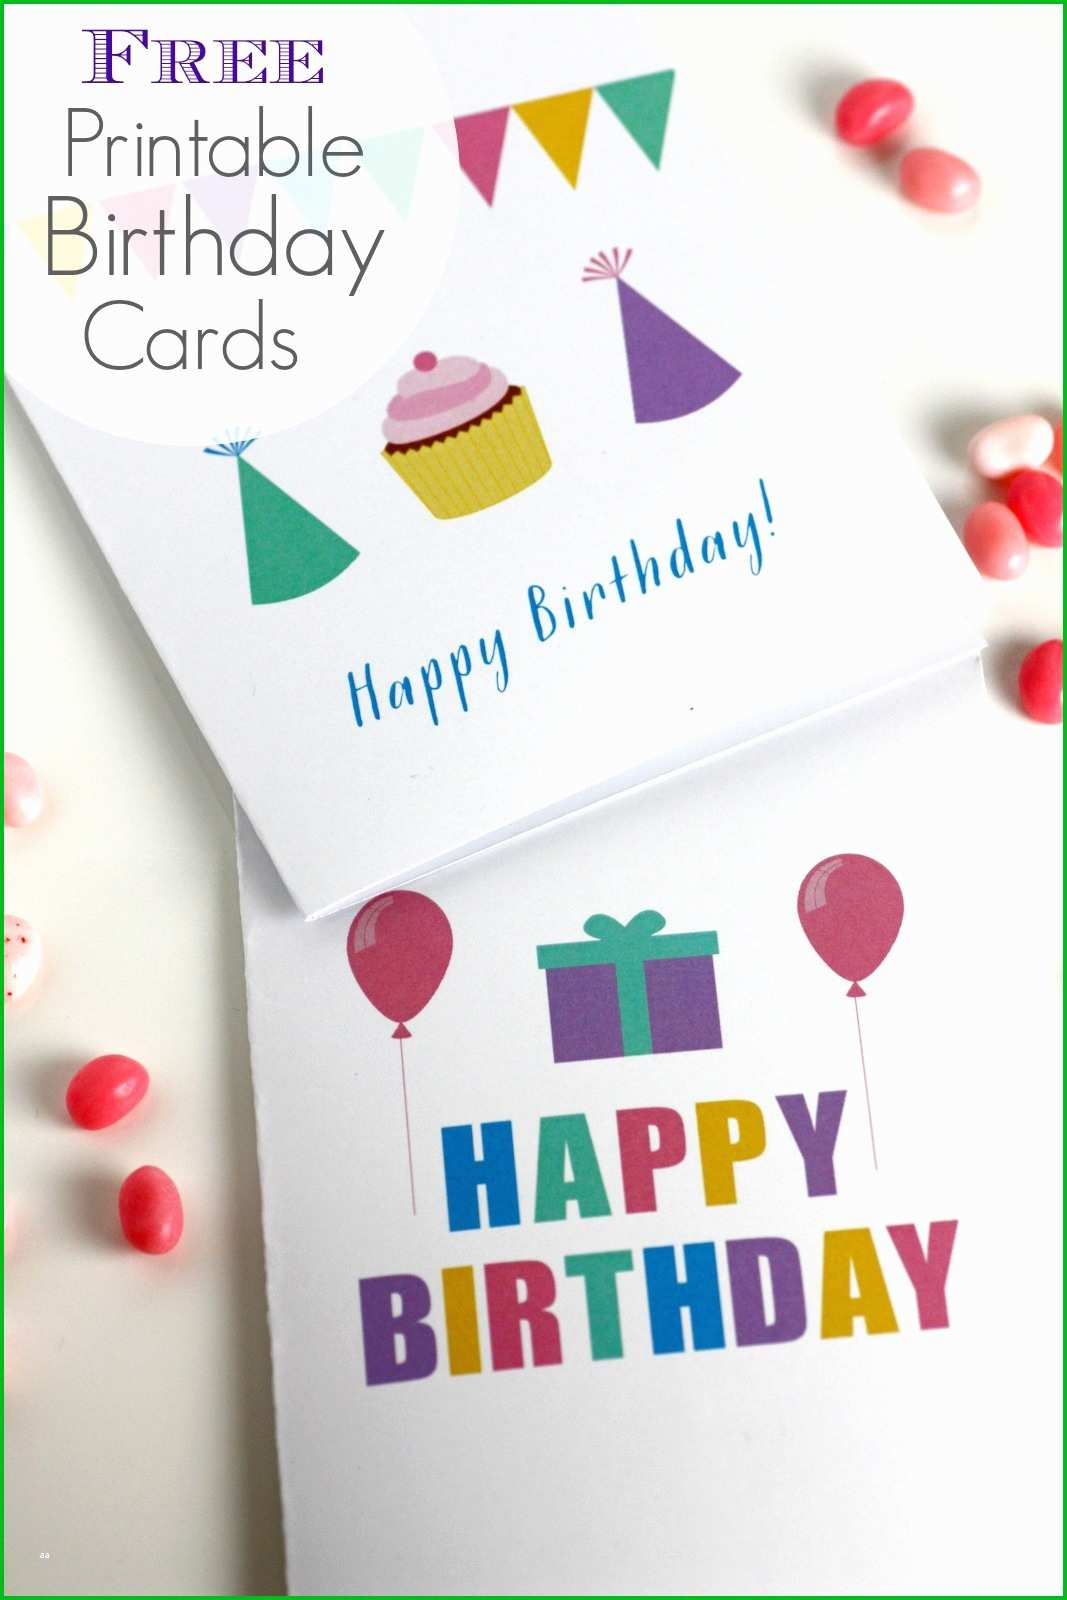 Printable Birthday Cards For Friends Funny ✓ The Christmas Gifts - Free Printable Funny Birthday Cards For Adults